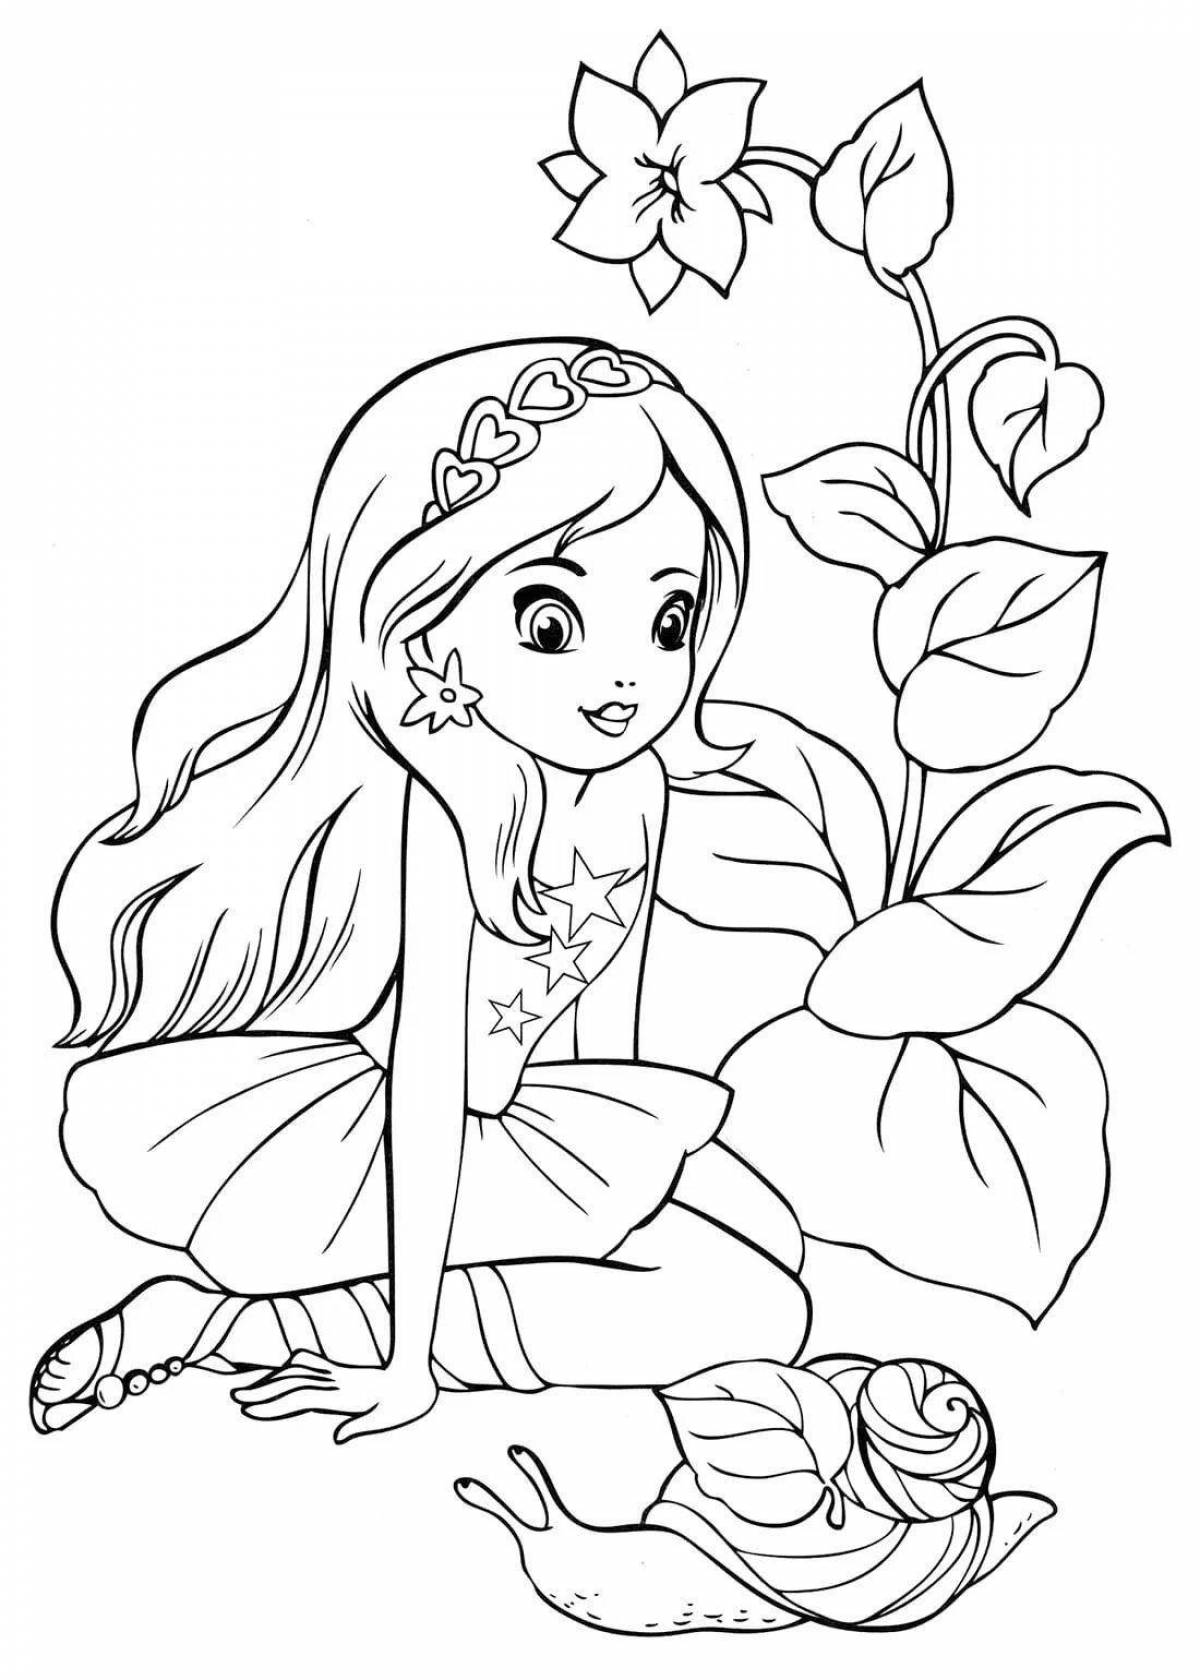 Color printout of the coloring page